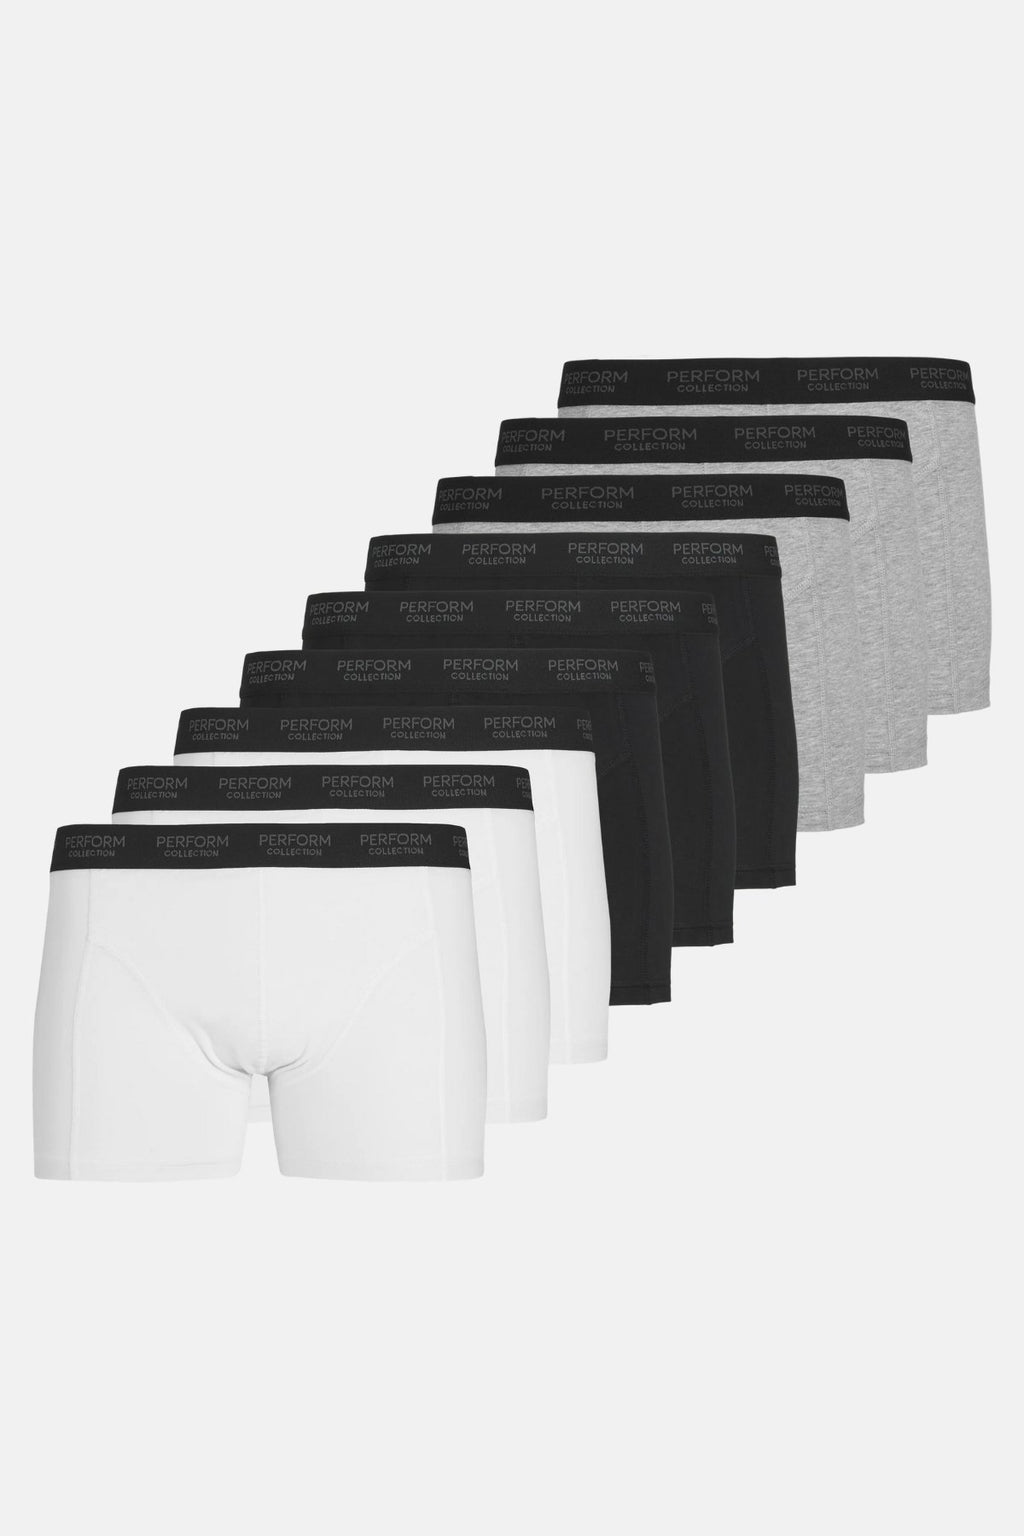 Performance Trunks - Package Deal (9 pcs.)